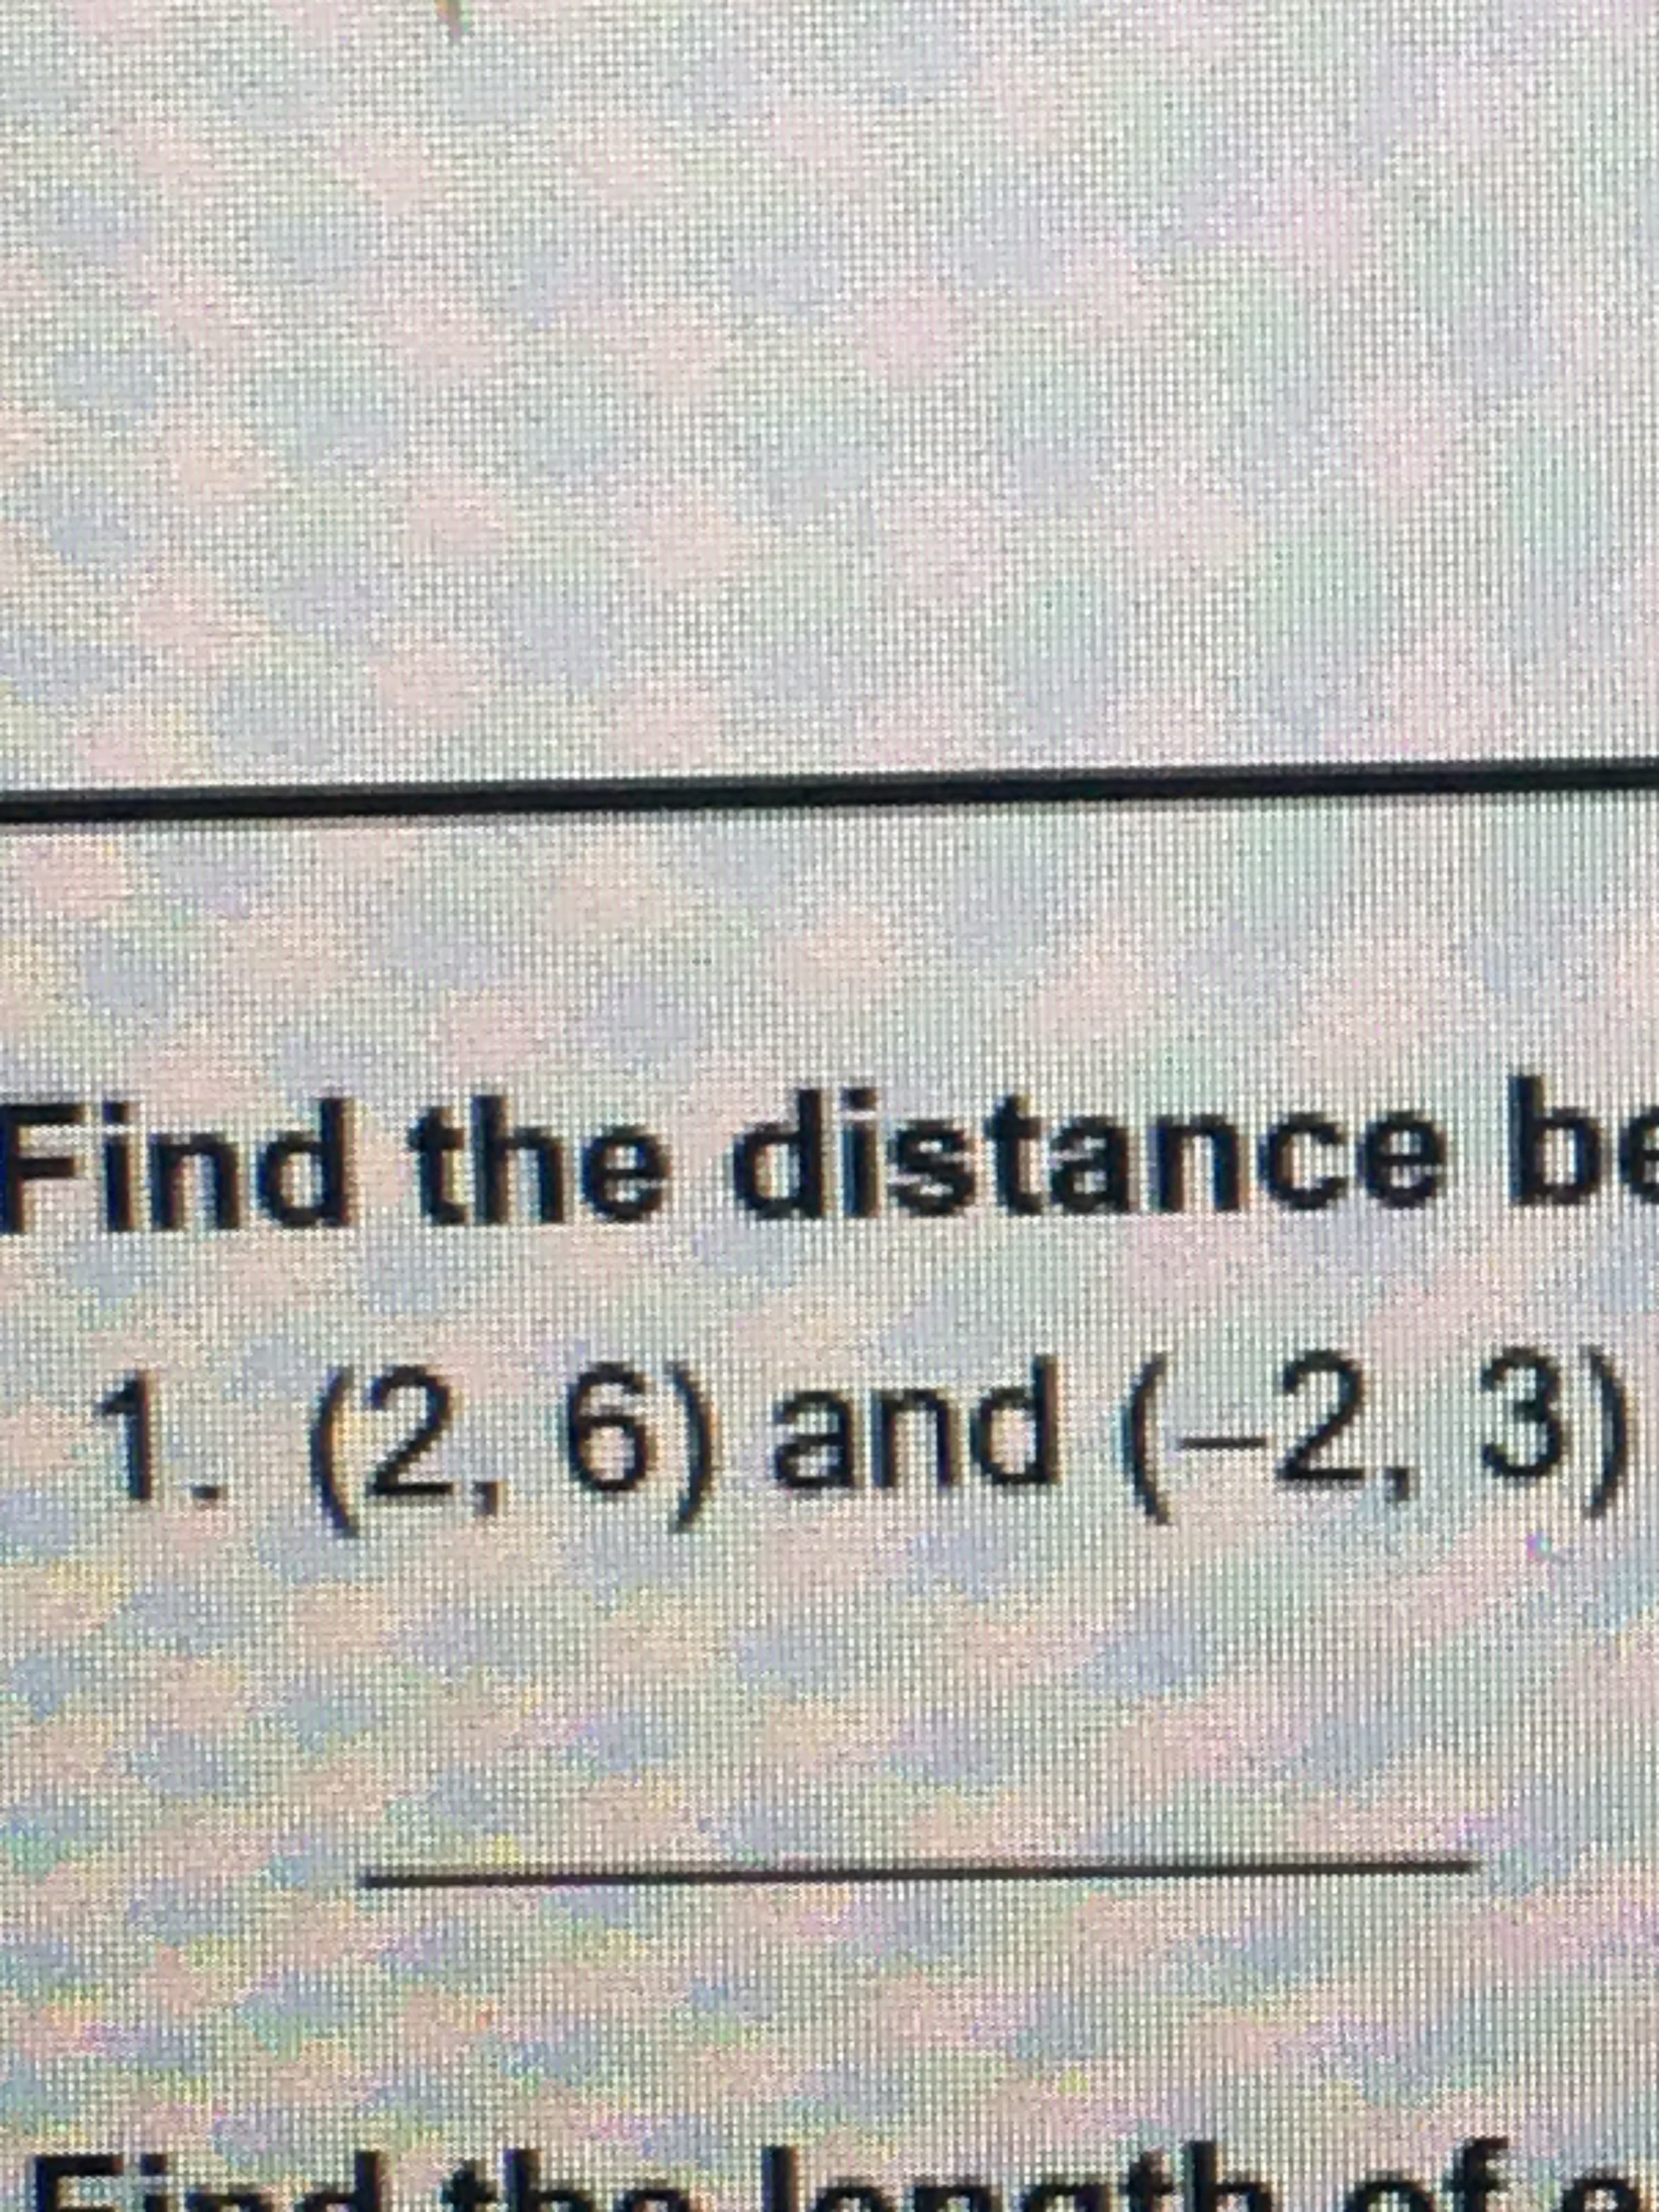 Find the distance be
1. (2, 6) and (-2, 3)
